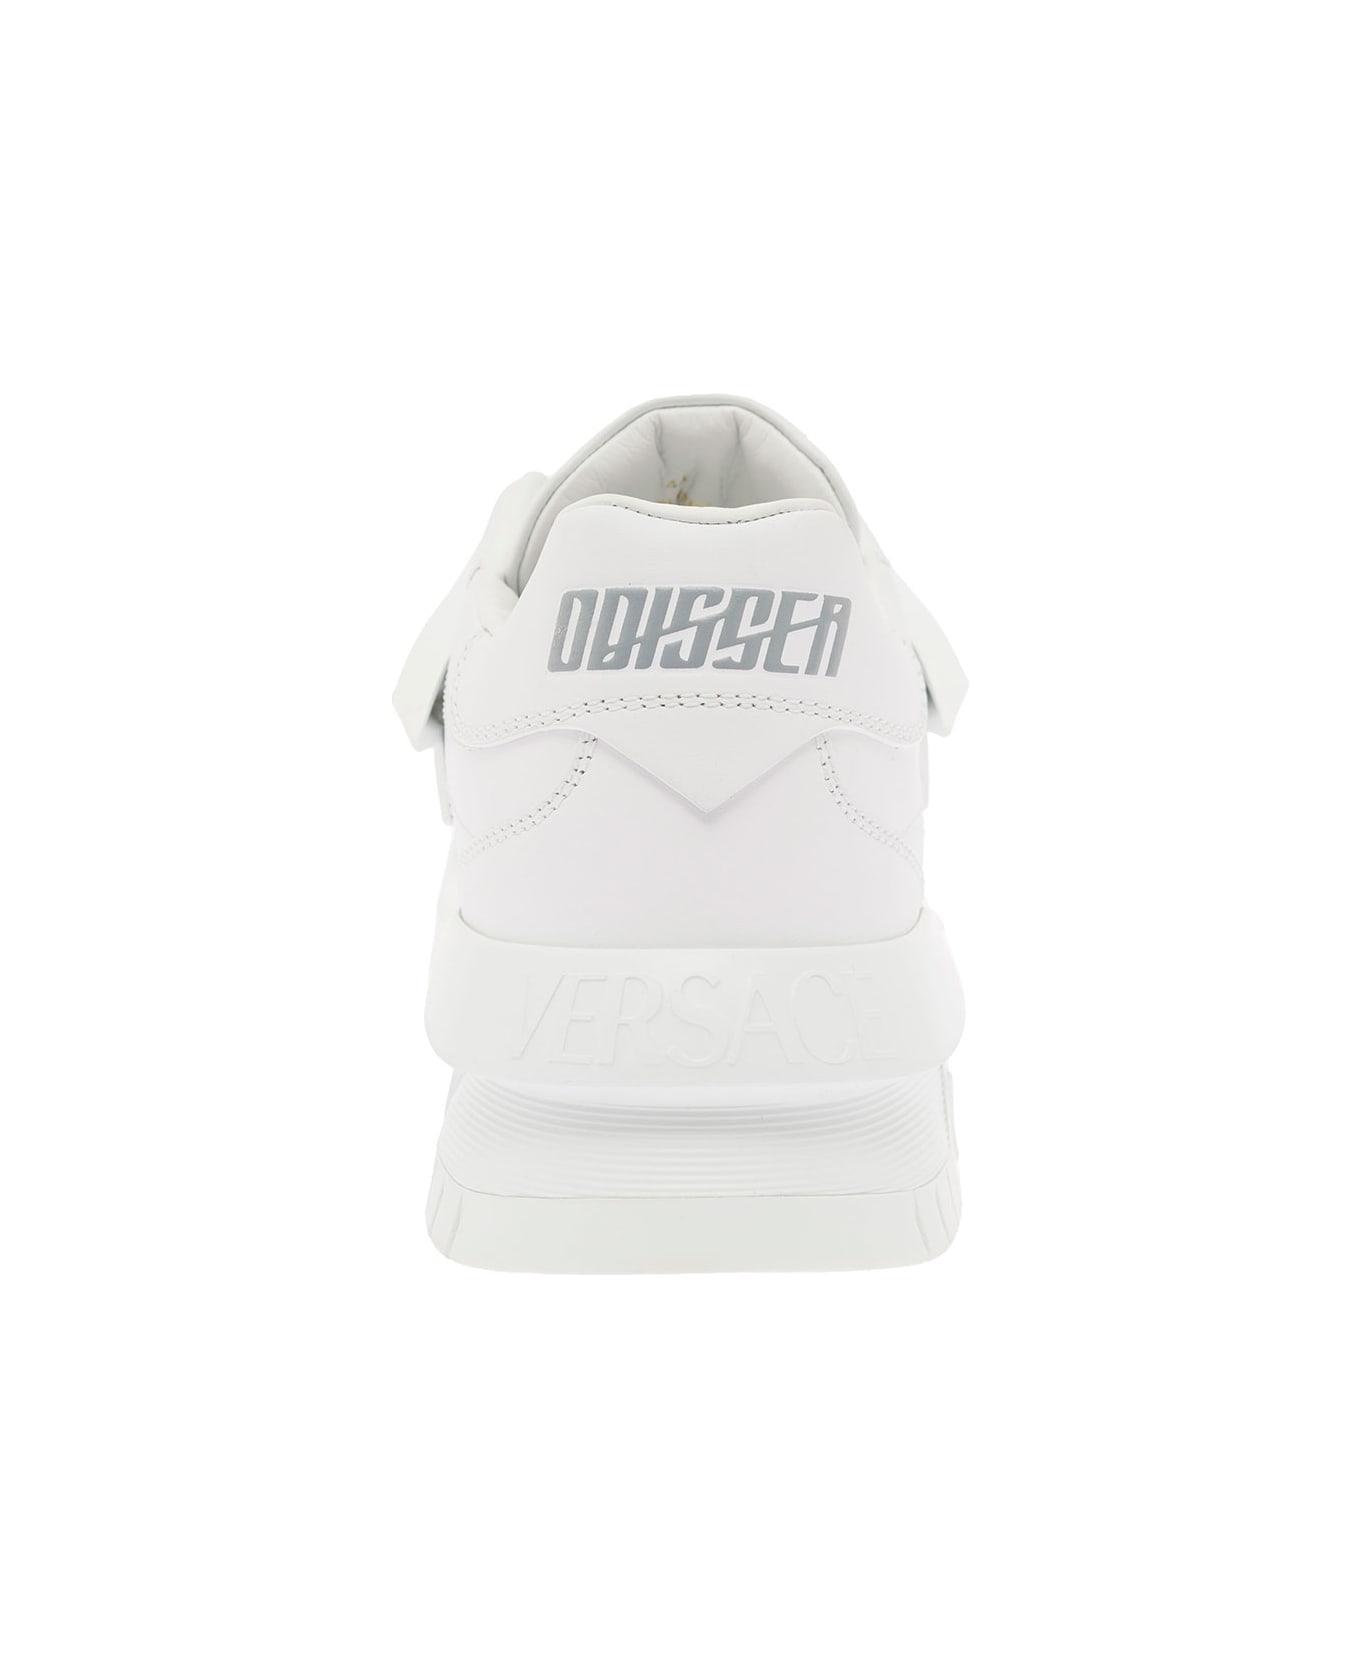 Versace Odissea White Leather And Rubber Sneakers Versace Man - White